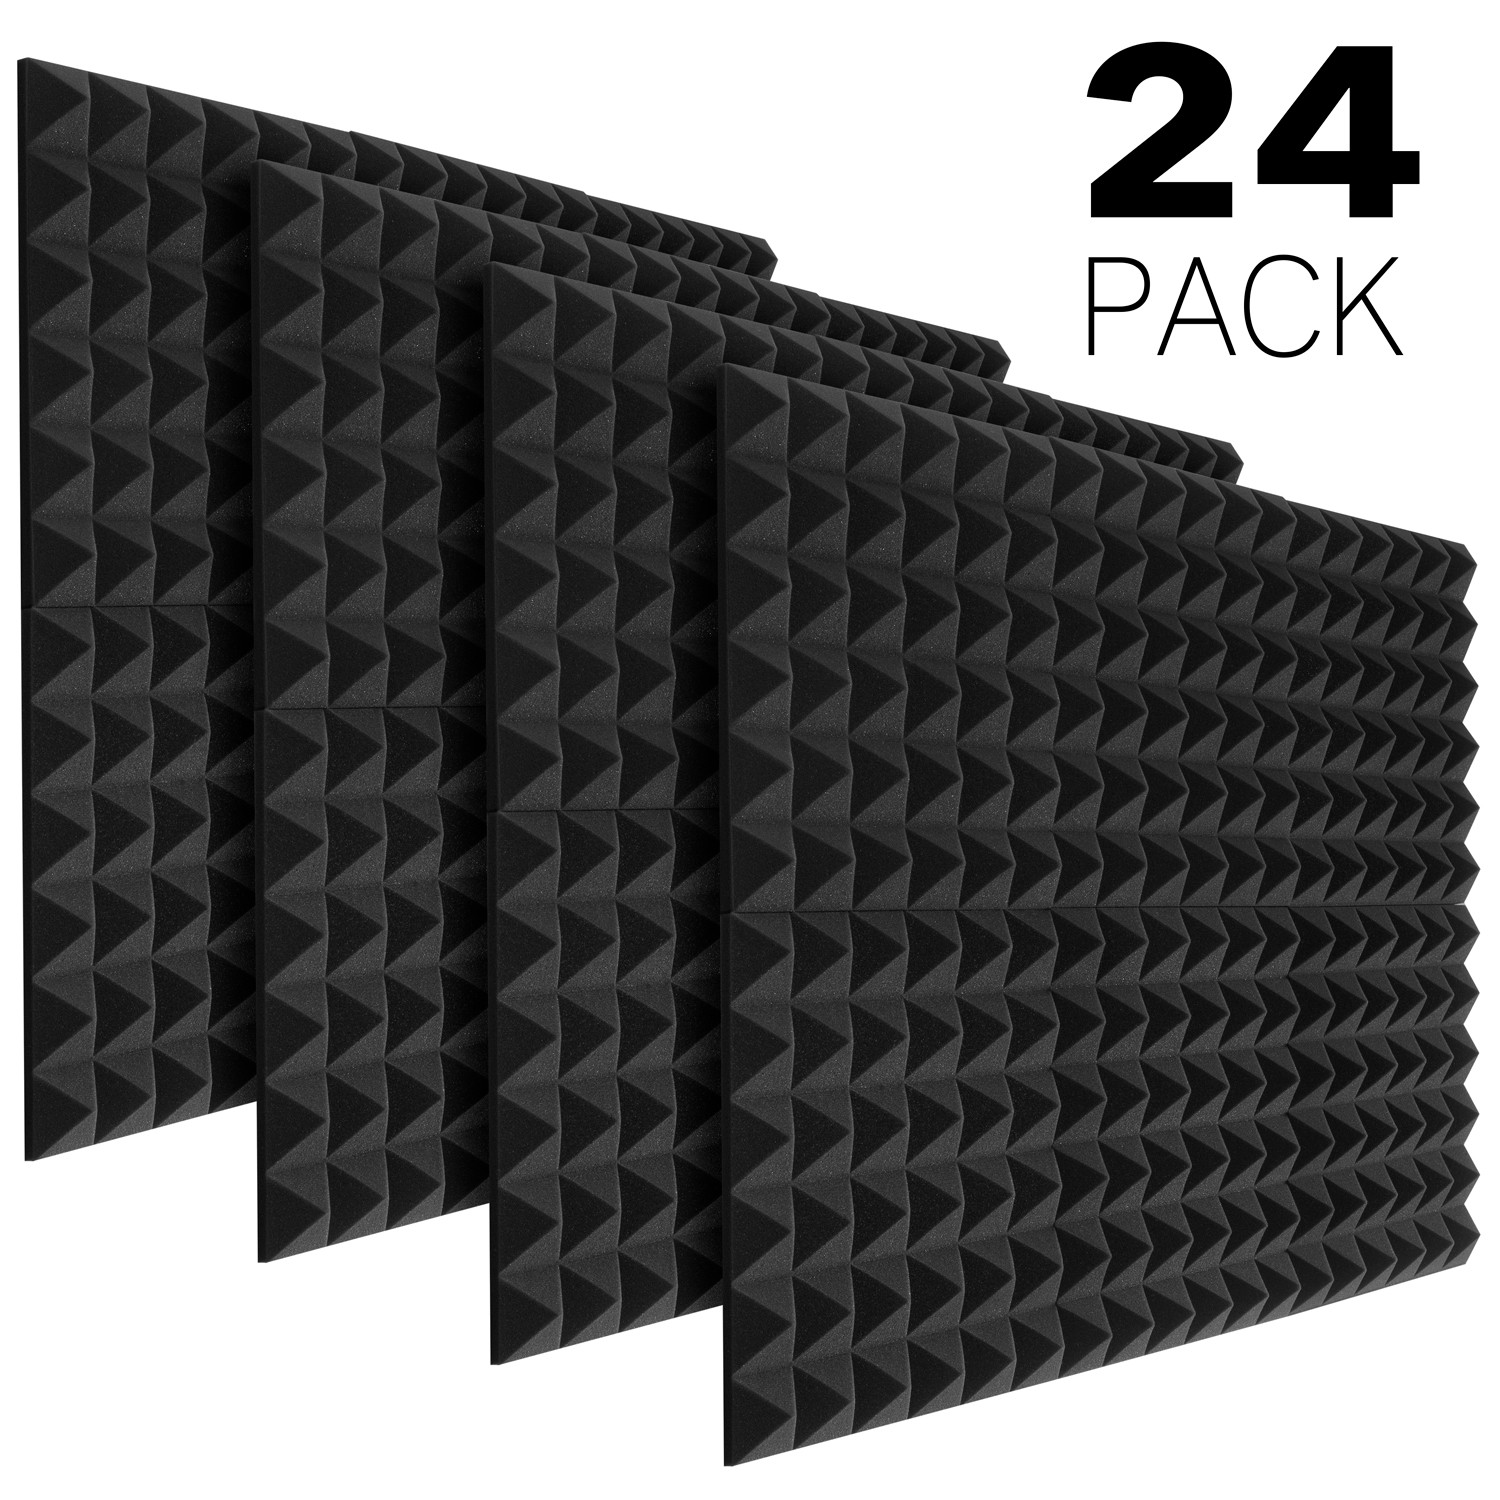 6 Pack, Gray 12 X 12 X 0.45 Soundproofing Insulation Panel Tiles High Density Polyester Fiber Acoustic Treatment for Studio Home and Office JBER Acoustic Absorption Panels 